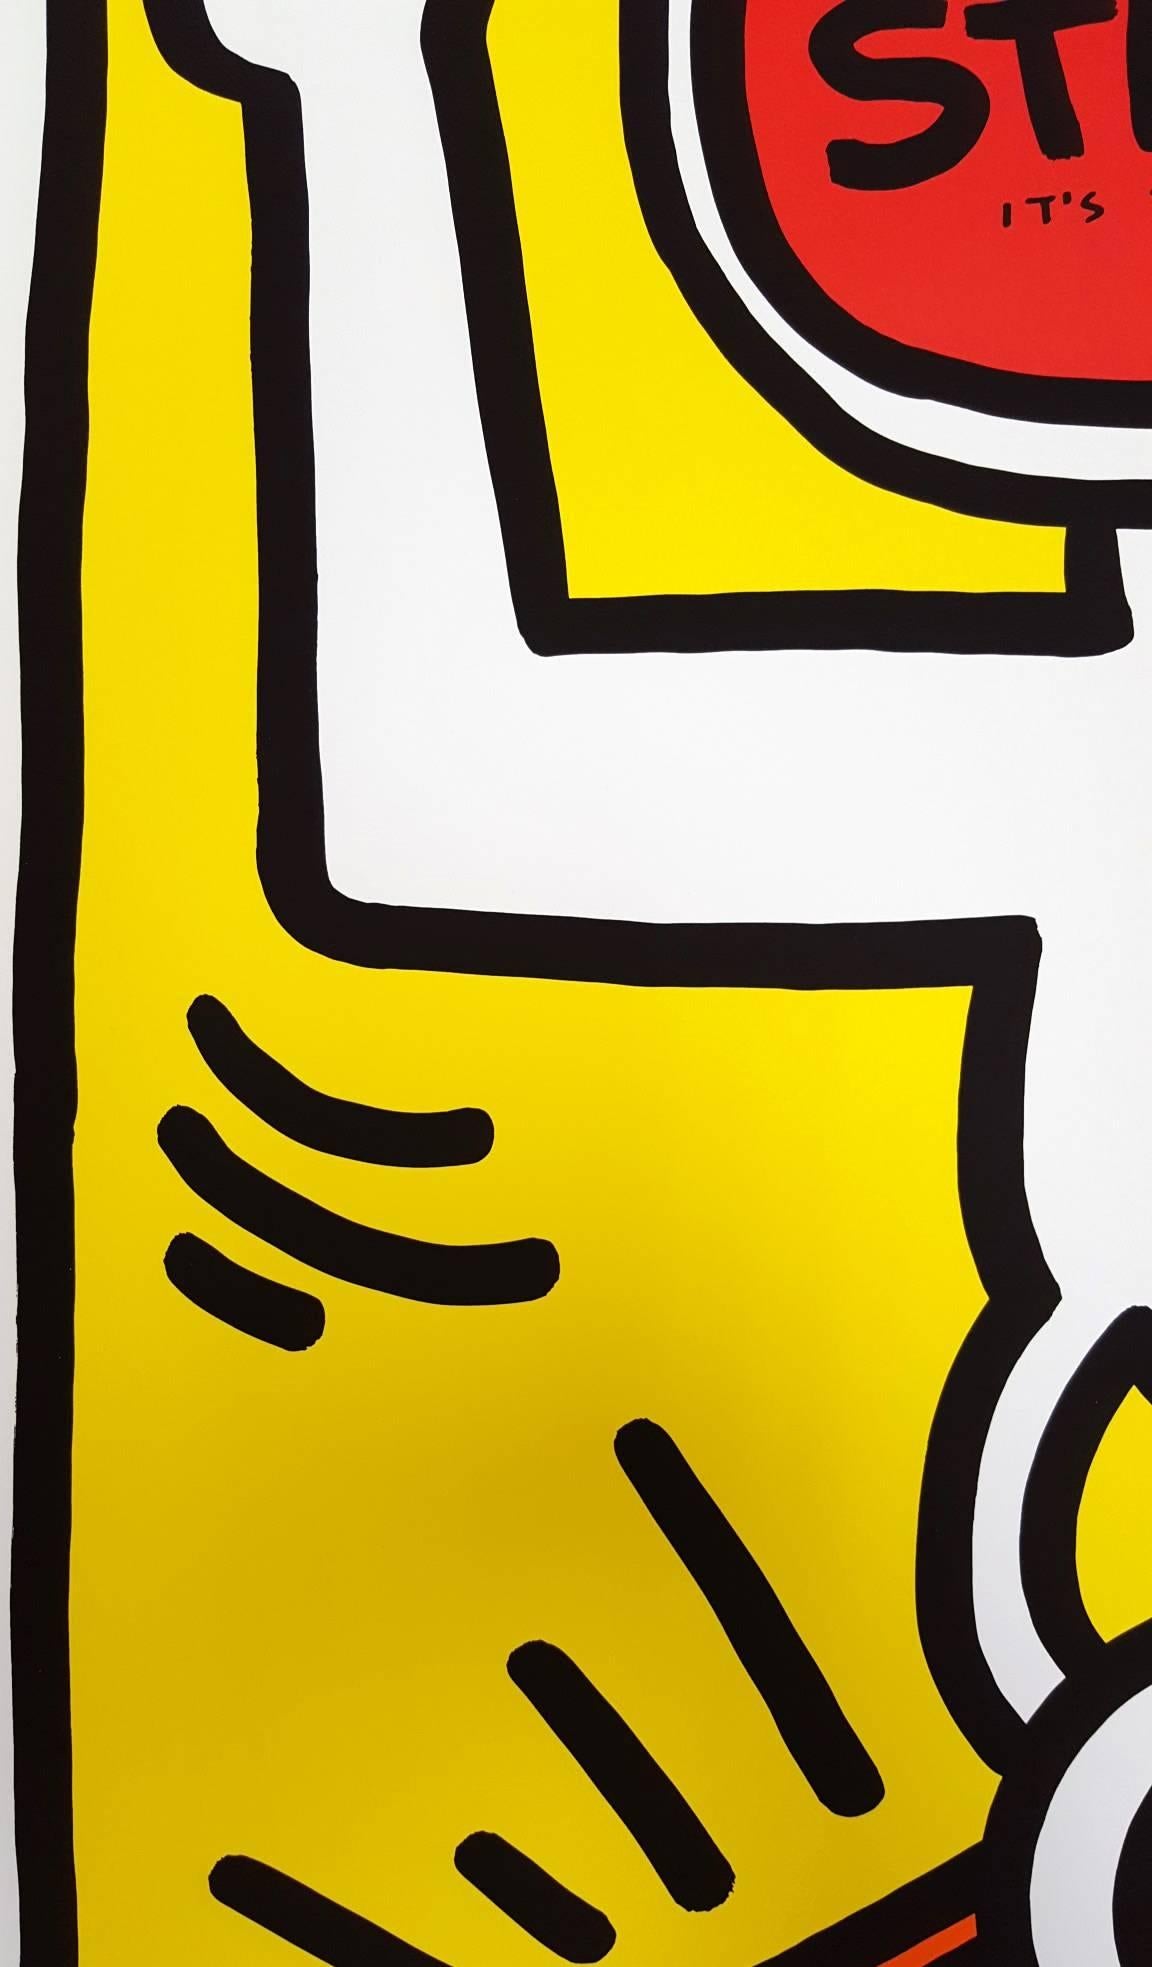 An original screenprint poster on wove paper by American artist Keith Haring (1958-1990) titled 